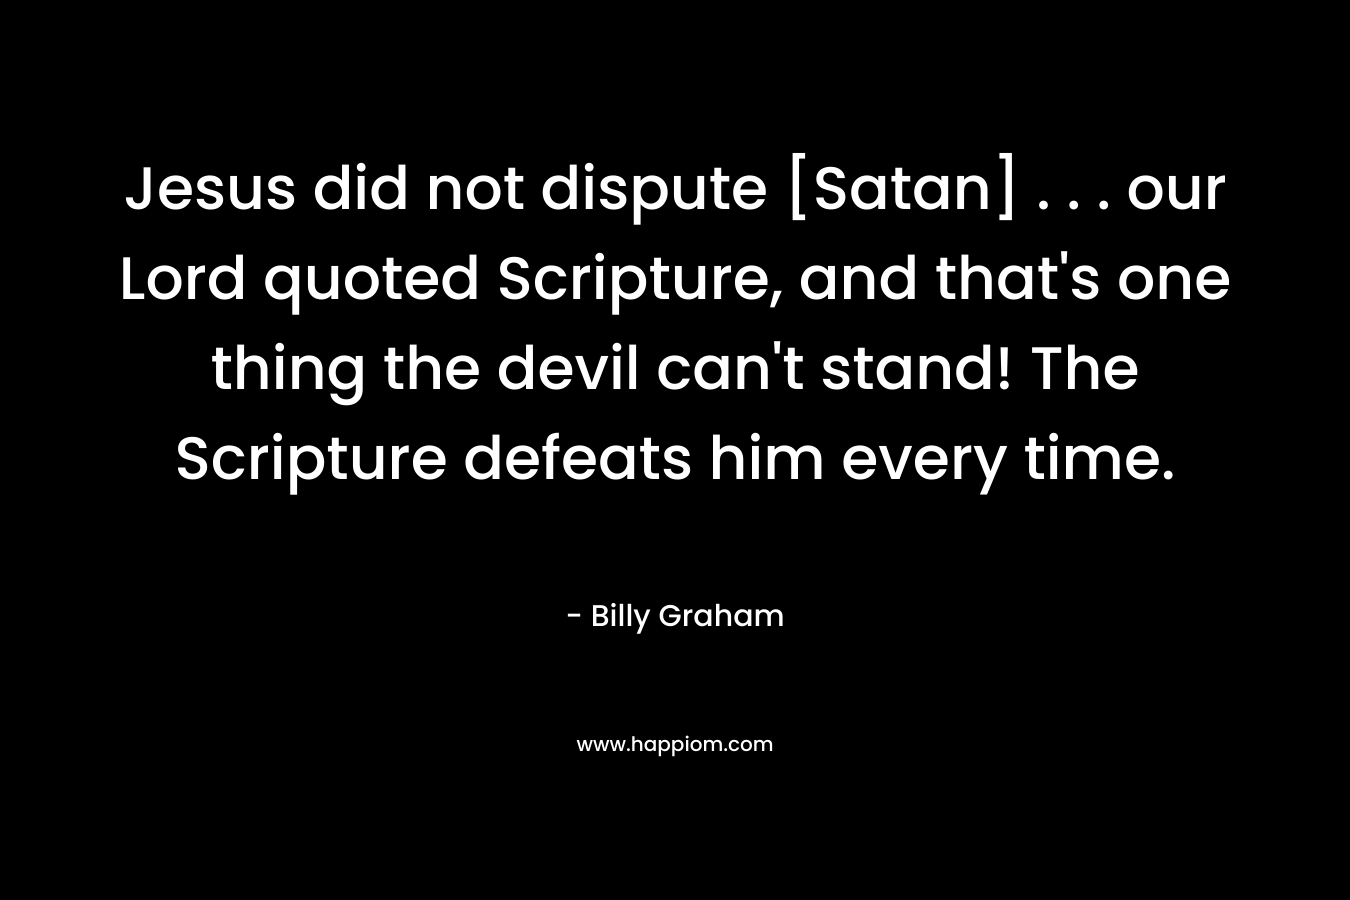 Jesus did not dispute [Satan] . . . our Lord quoted Scripture, and that’s one thing the devil can’t stand! The Scripture defeats him every time. – Billy Graham